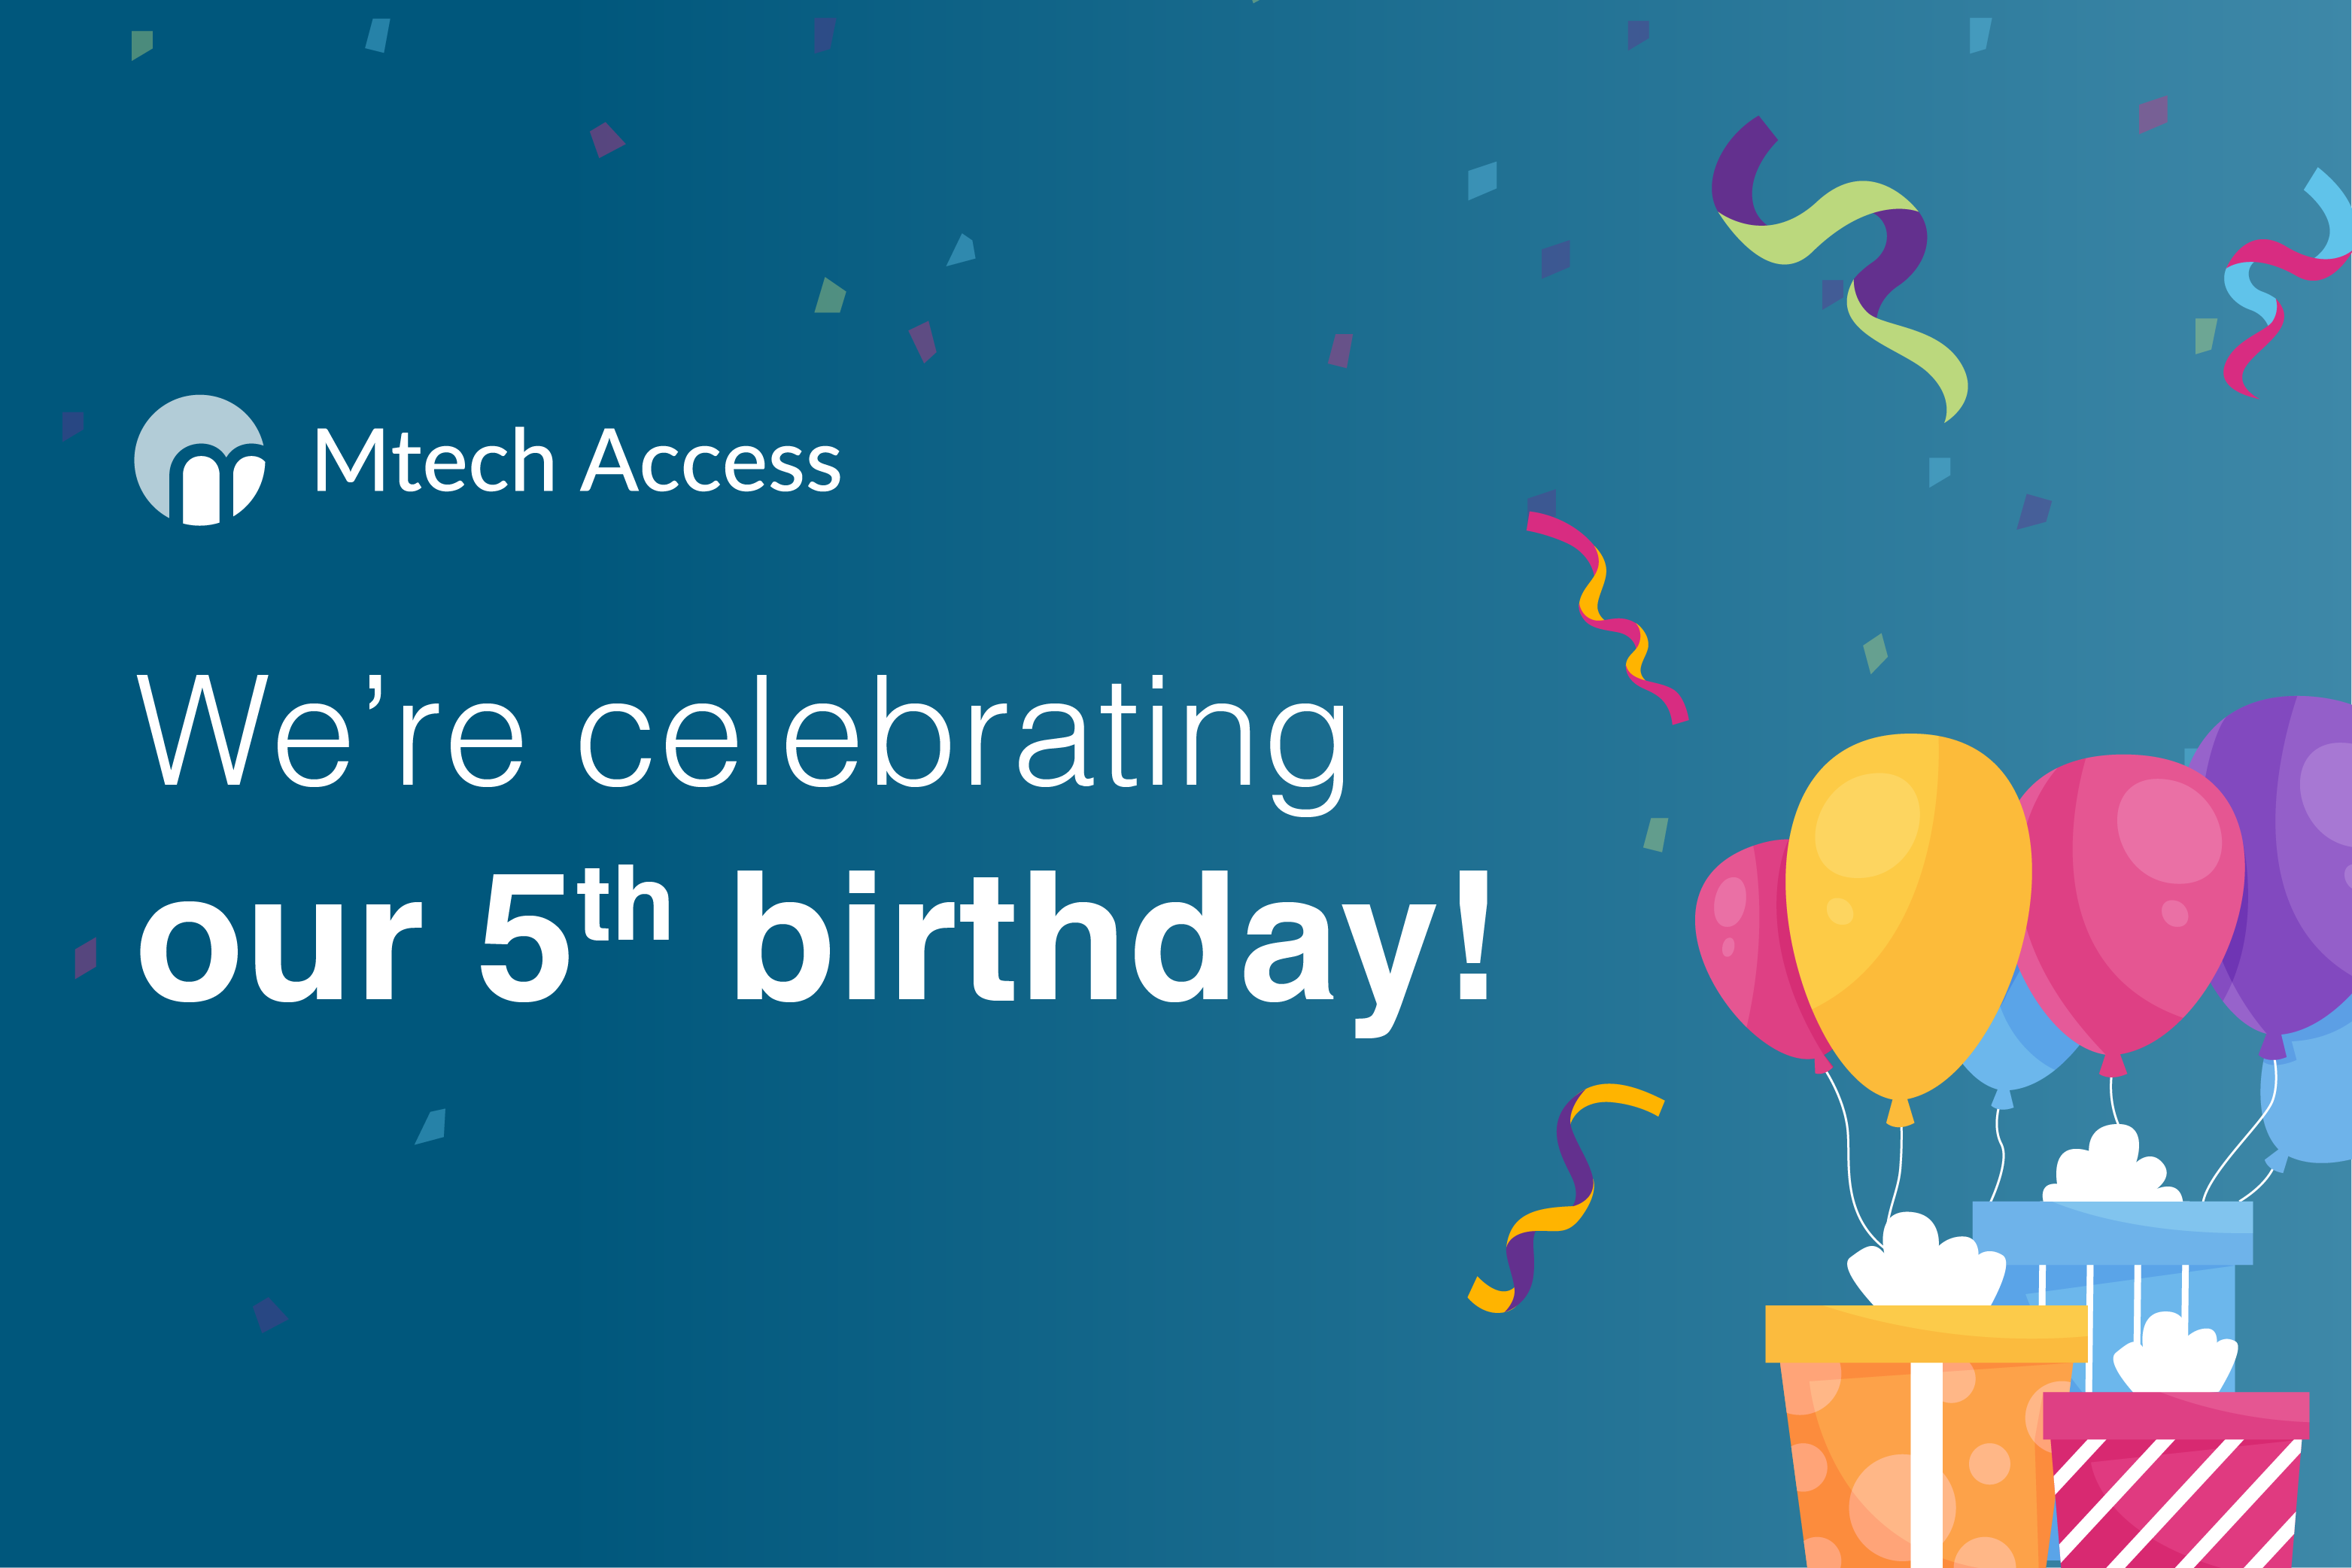 At Mtech Acccess. we're celebrating our 5th birthday!